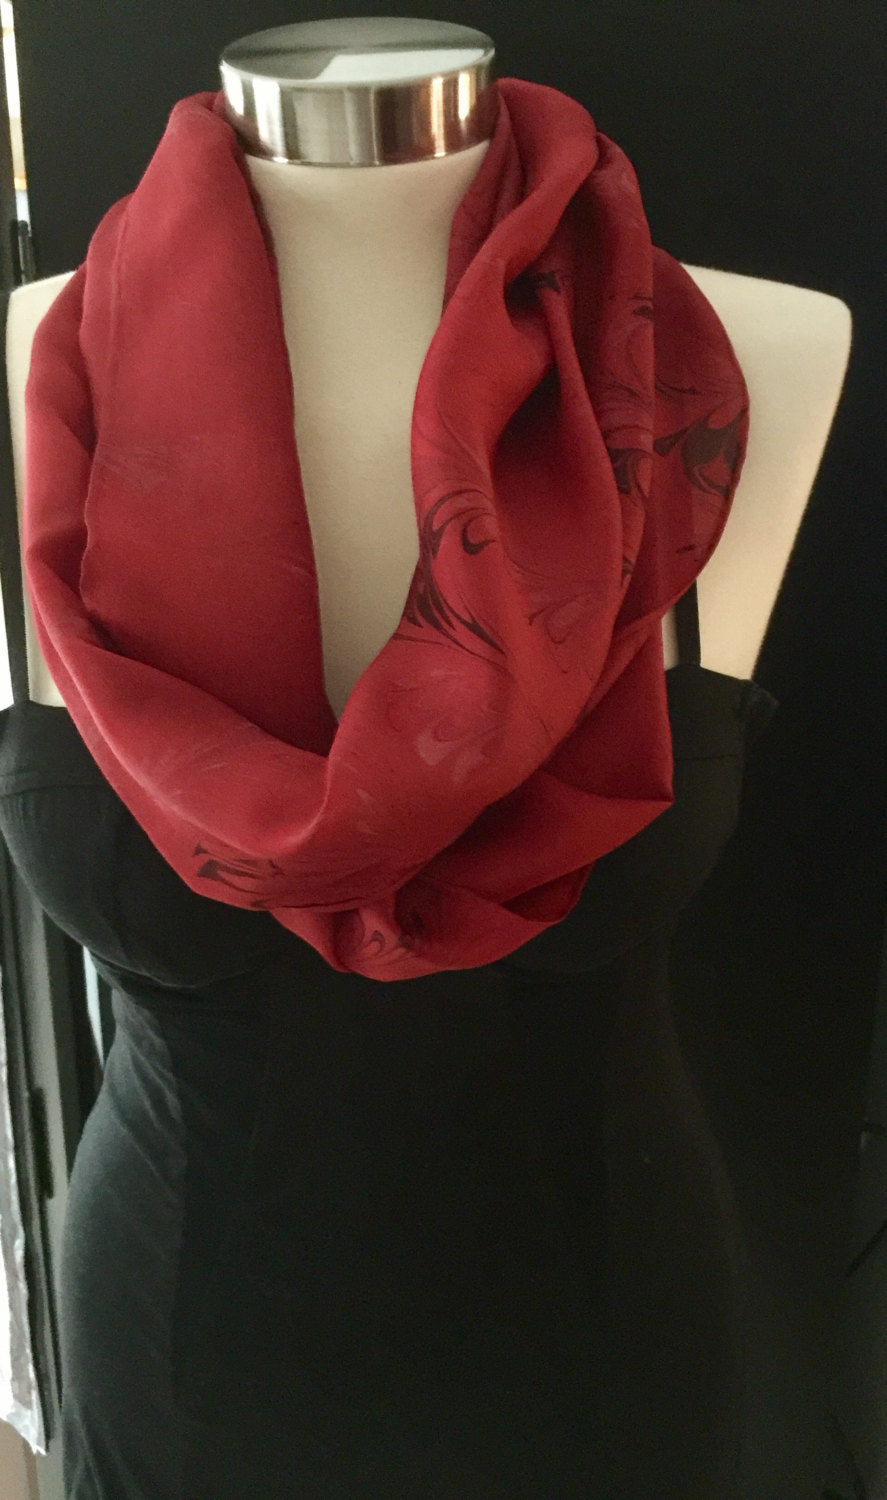 Water marbled Infinity Scarf/Shrug Silk Red